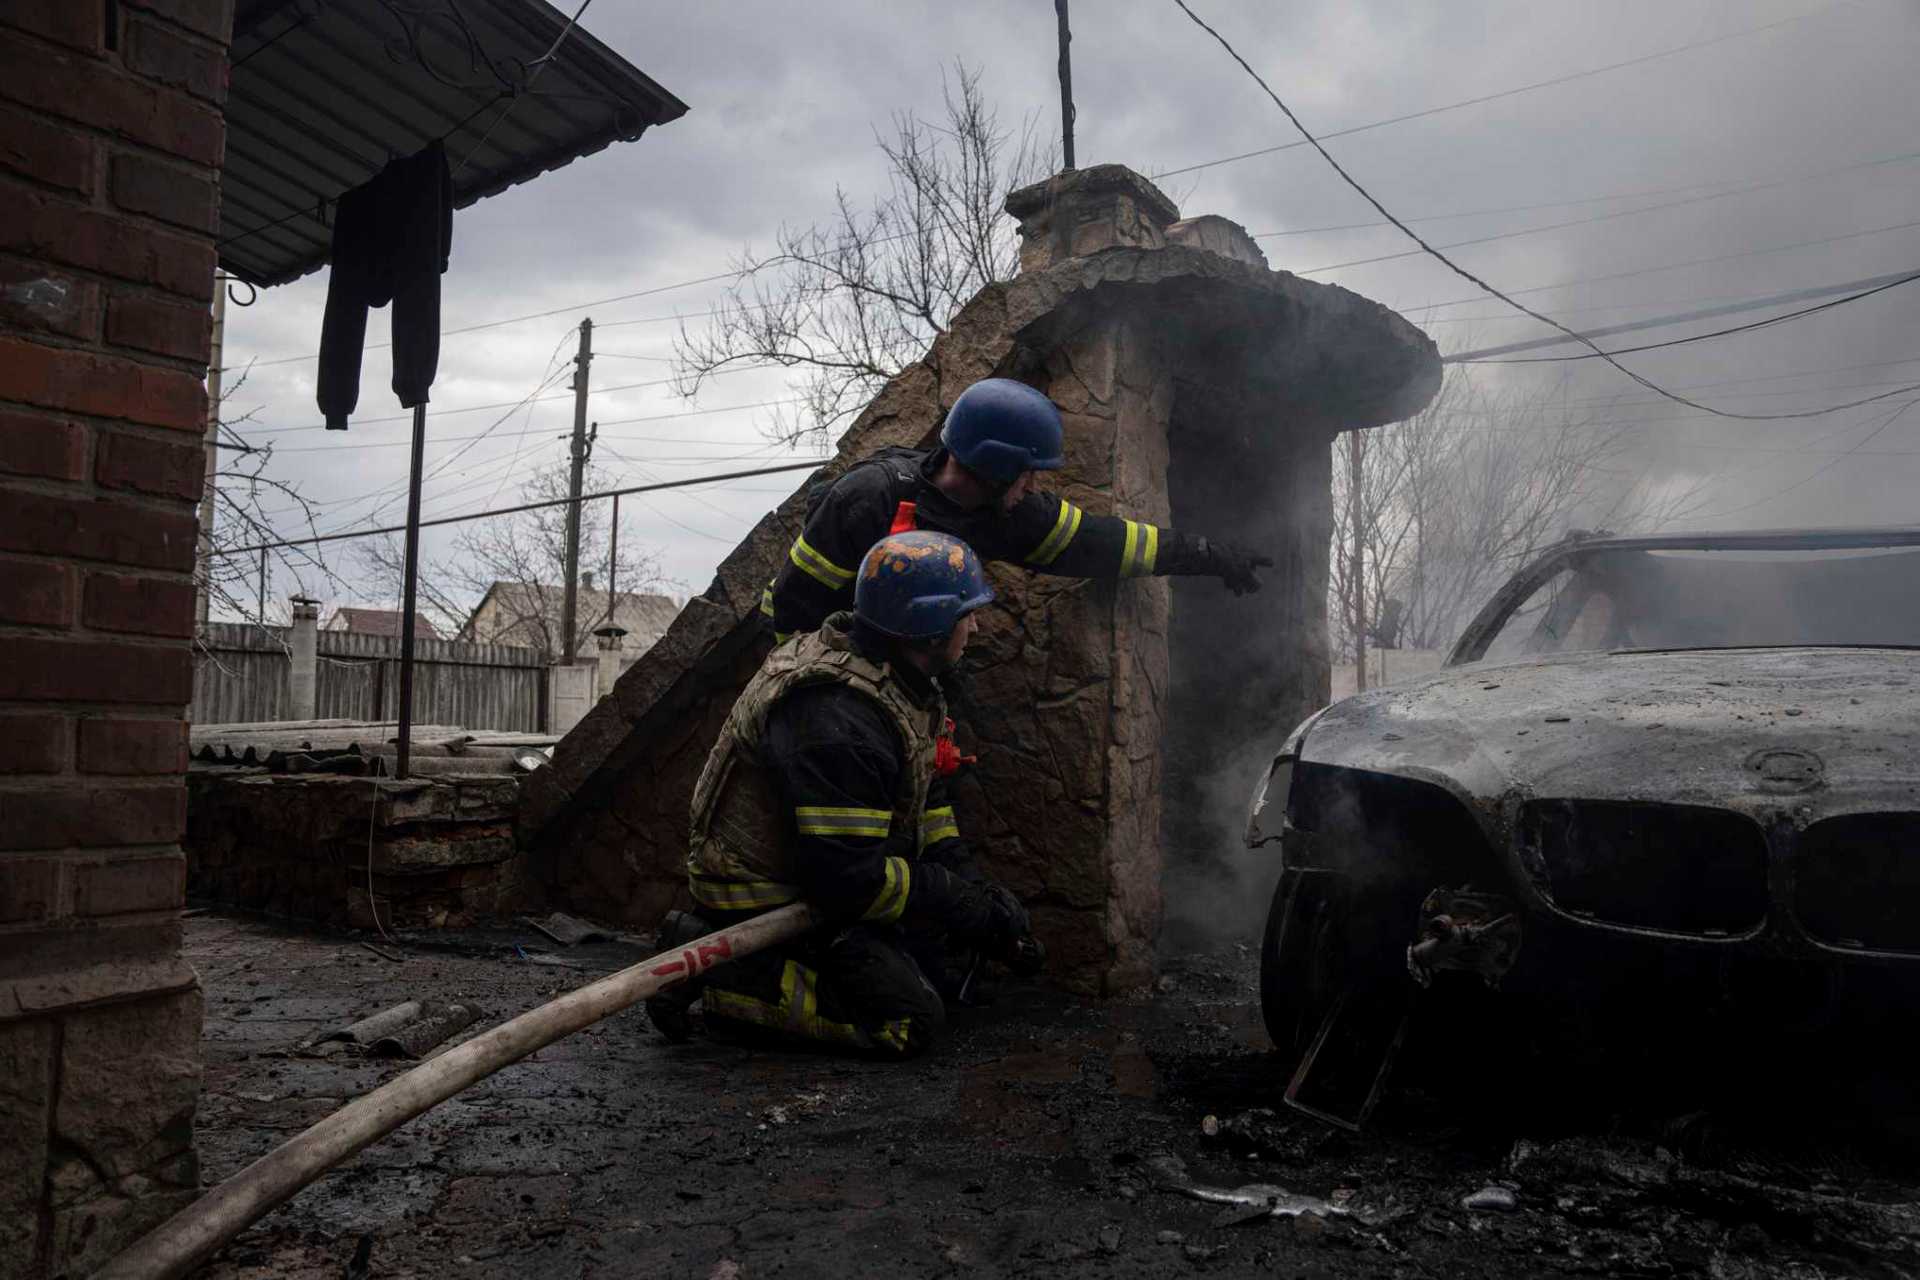 Rescue workers take cover after new explosions next to them as they try to put out a fire in a house which was shelled by Russian forces at the residential neighbourhood in Kostiantynivka